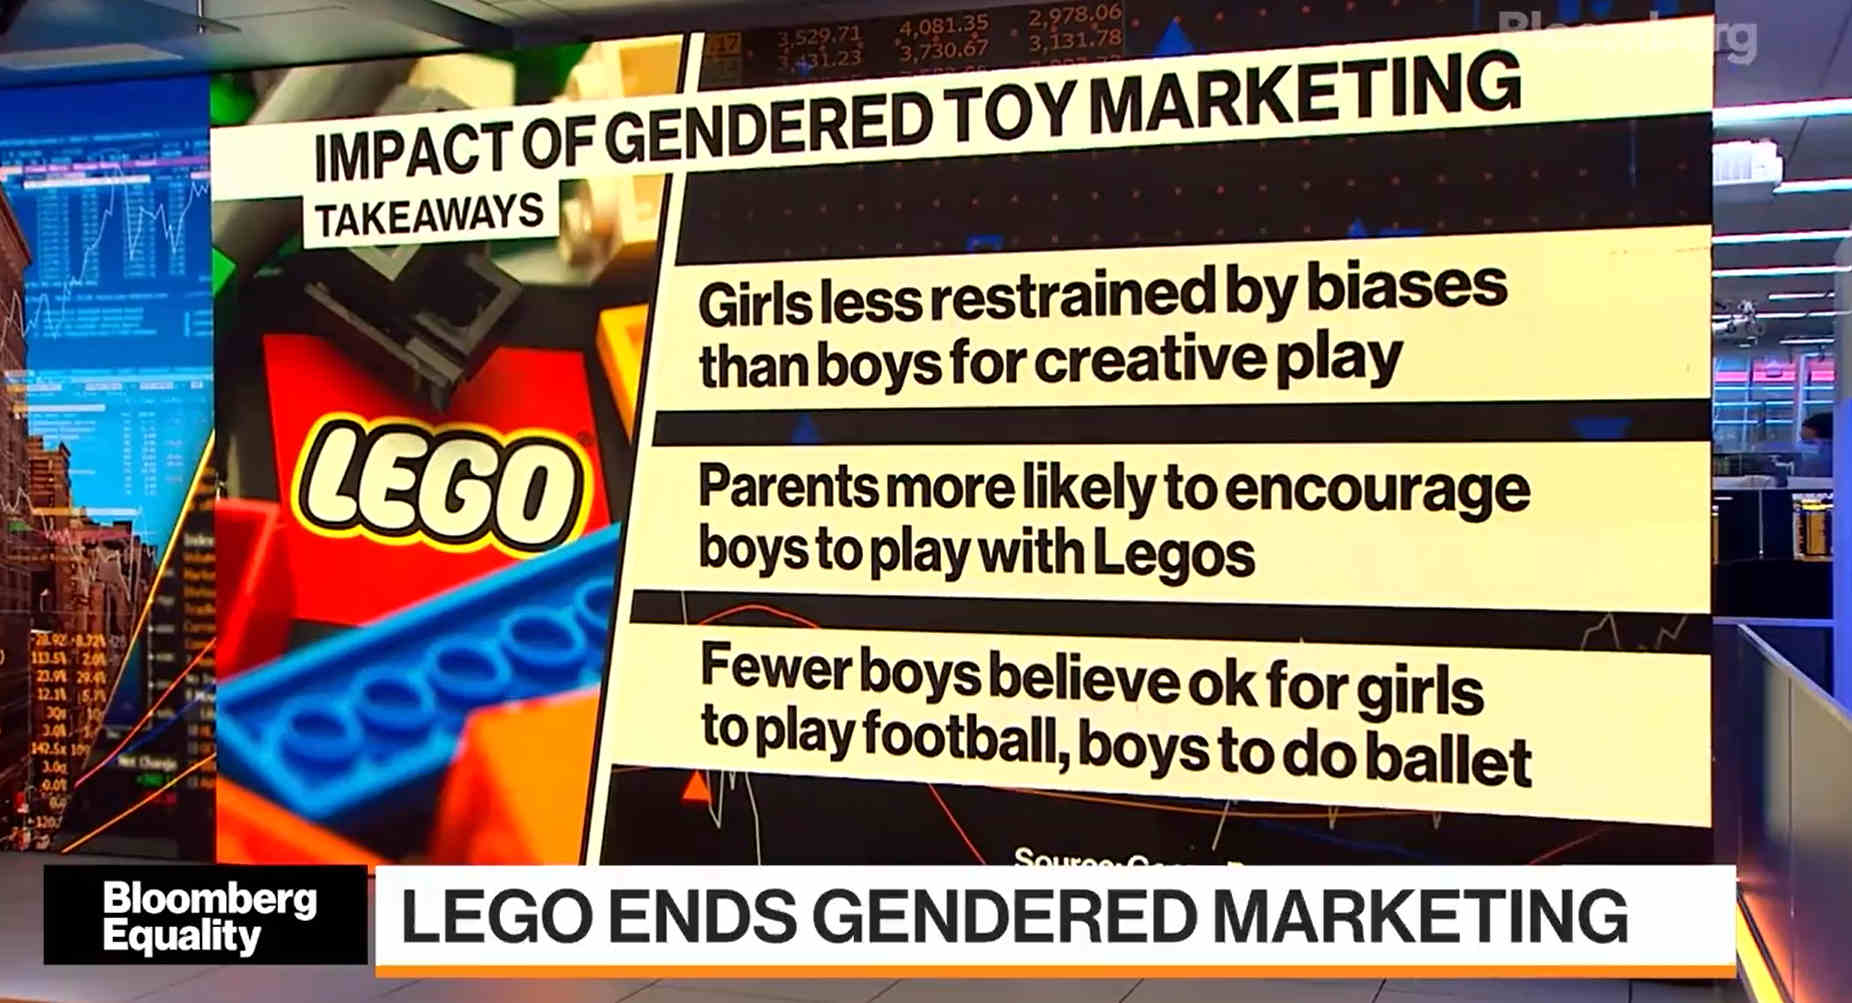 Video – The push to end gendered toy marketing